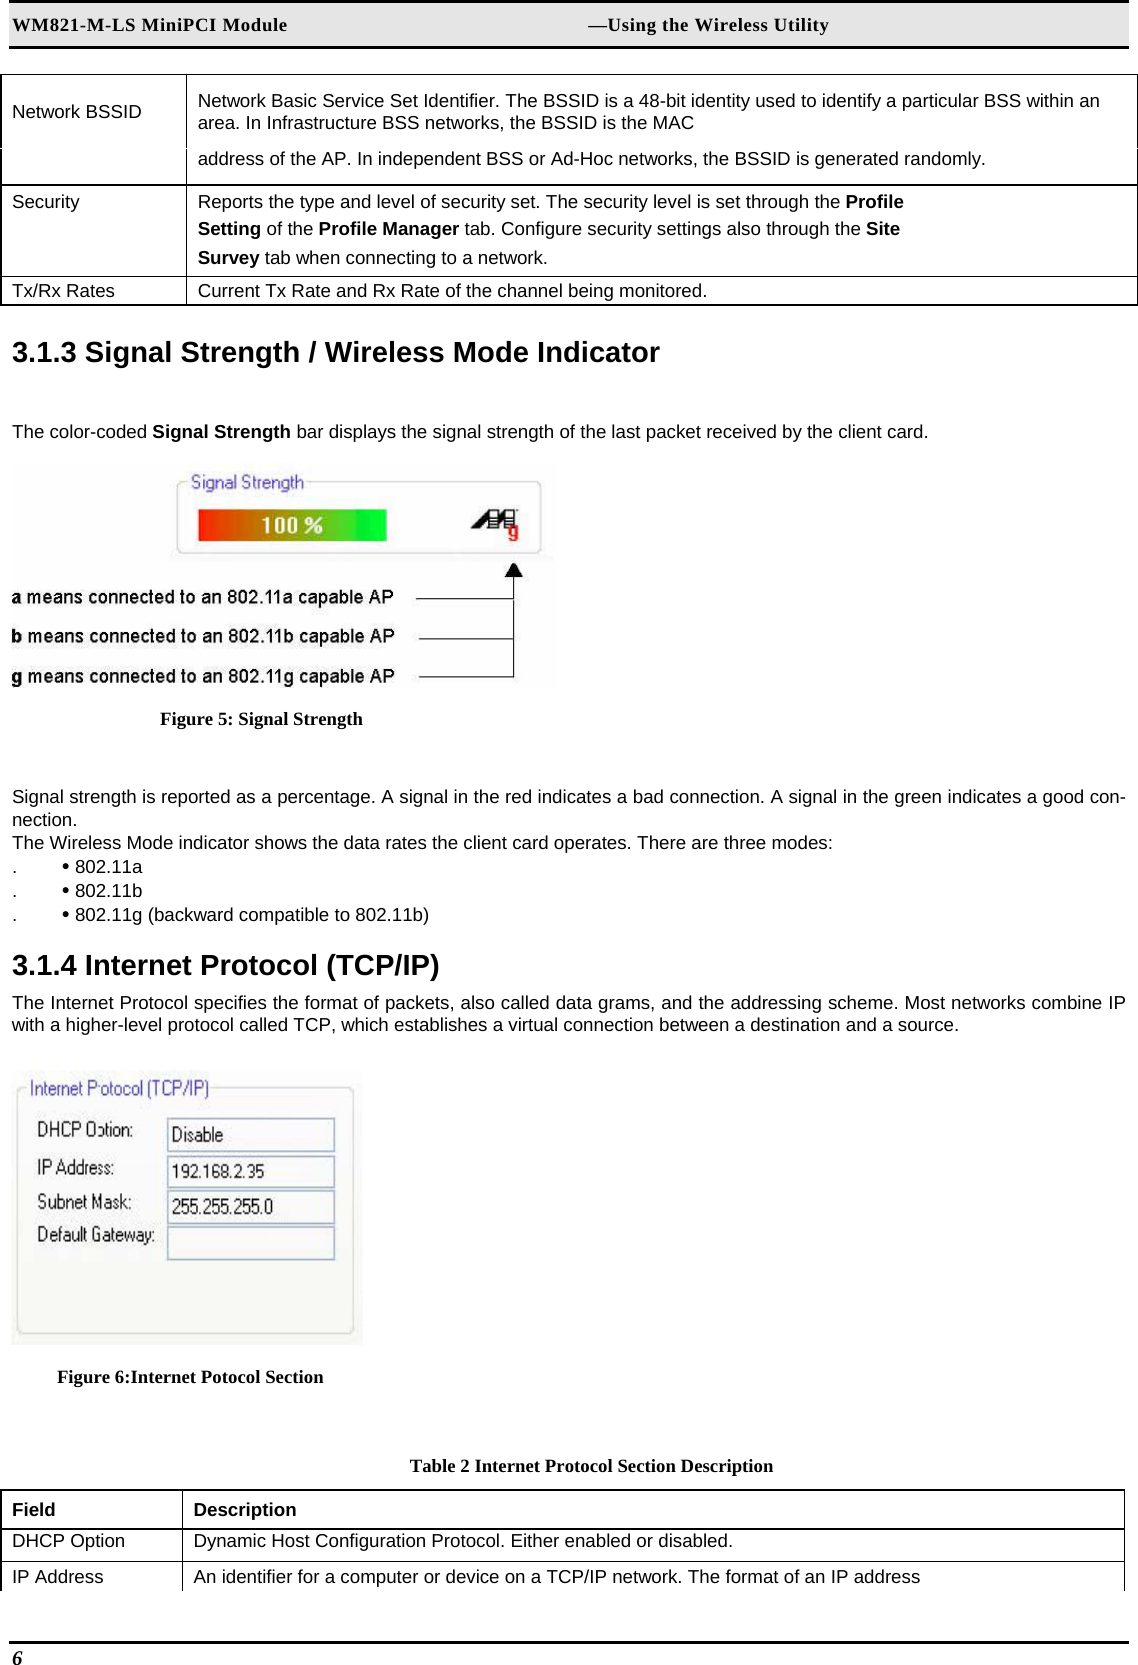 WM821-M-LS MiniPCI Module                                                        —Using the Wireless Utility 6   Network BSSID   Network Basic Service Set Identifier. The BSSID is a 48-bit identity used to identify a particular BSS within an area. In Infrastructure BSS networks, the BSSID is the MAC   address of the AP. In independent BSS or Ad-Hoc networks, the BSSID is generated randomly.  Security   Reports the type and level of security set. The security level is set through the Profile   Setting of the Profile Manager tab. Configure security settings also through the Site   Survey tab when connecting to a network.  Tx/Rx Rates   Current Tx Rate and Rx Rate of the channel being monitored.   3.1.3 Signal Strength / Wireless Mode Indicator  The color-coded Signal Strength bar displays the signal strength of the last packet received by the client card.   Figure 5: Signal Strength  Signal strength is reported as a percentage. A signal in the red indicates a bad connection. A signal in the green indicates a good con-nection.  The Wireless Mode indicator shows the data rates the client card operates. There are three modes:  .  • 802.11a  .  • 802.11b  .  • 802.11g (backward compatible to 802.11b)   3.1.4 Internet Protocol (TCP/IP)  The Internet Protocol specifies the format of packets, also called data grams, and the addressing scheme. Most networks combine IP with a higher-level protocol called TCP, which establishes a virtual connection between a destination and a source.   Figure 6:Internet Potocol Section  Table 2 Internet Protocol Section Description Field  Description  DHCP Option   Dynamic Host Configuration Protocol. Either enabled or disabled.  IP Address   An identifier for a computer or device on a TCP/IP network. The format of an IP address  